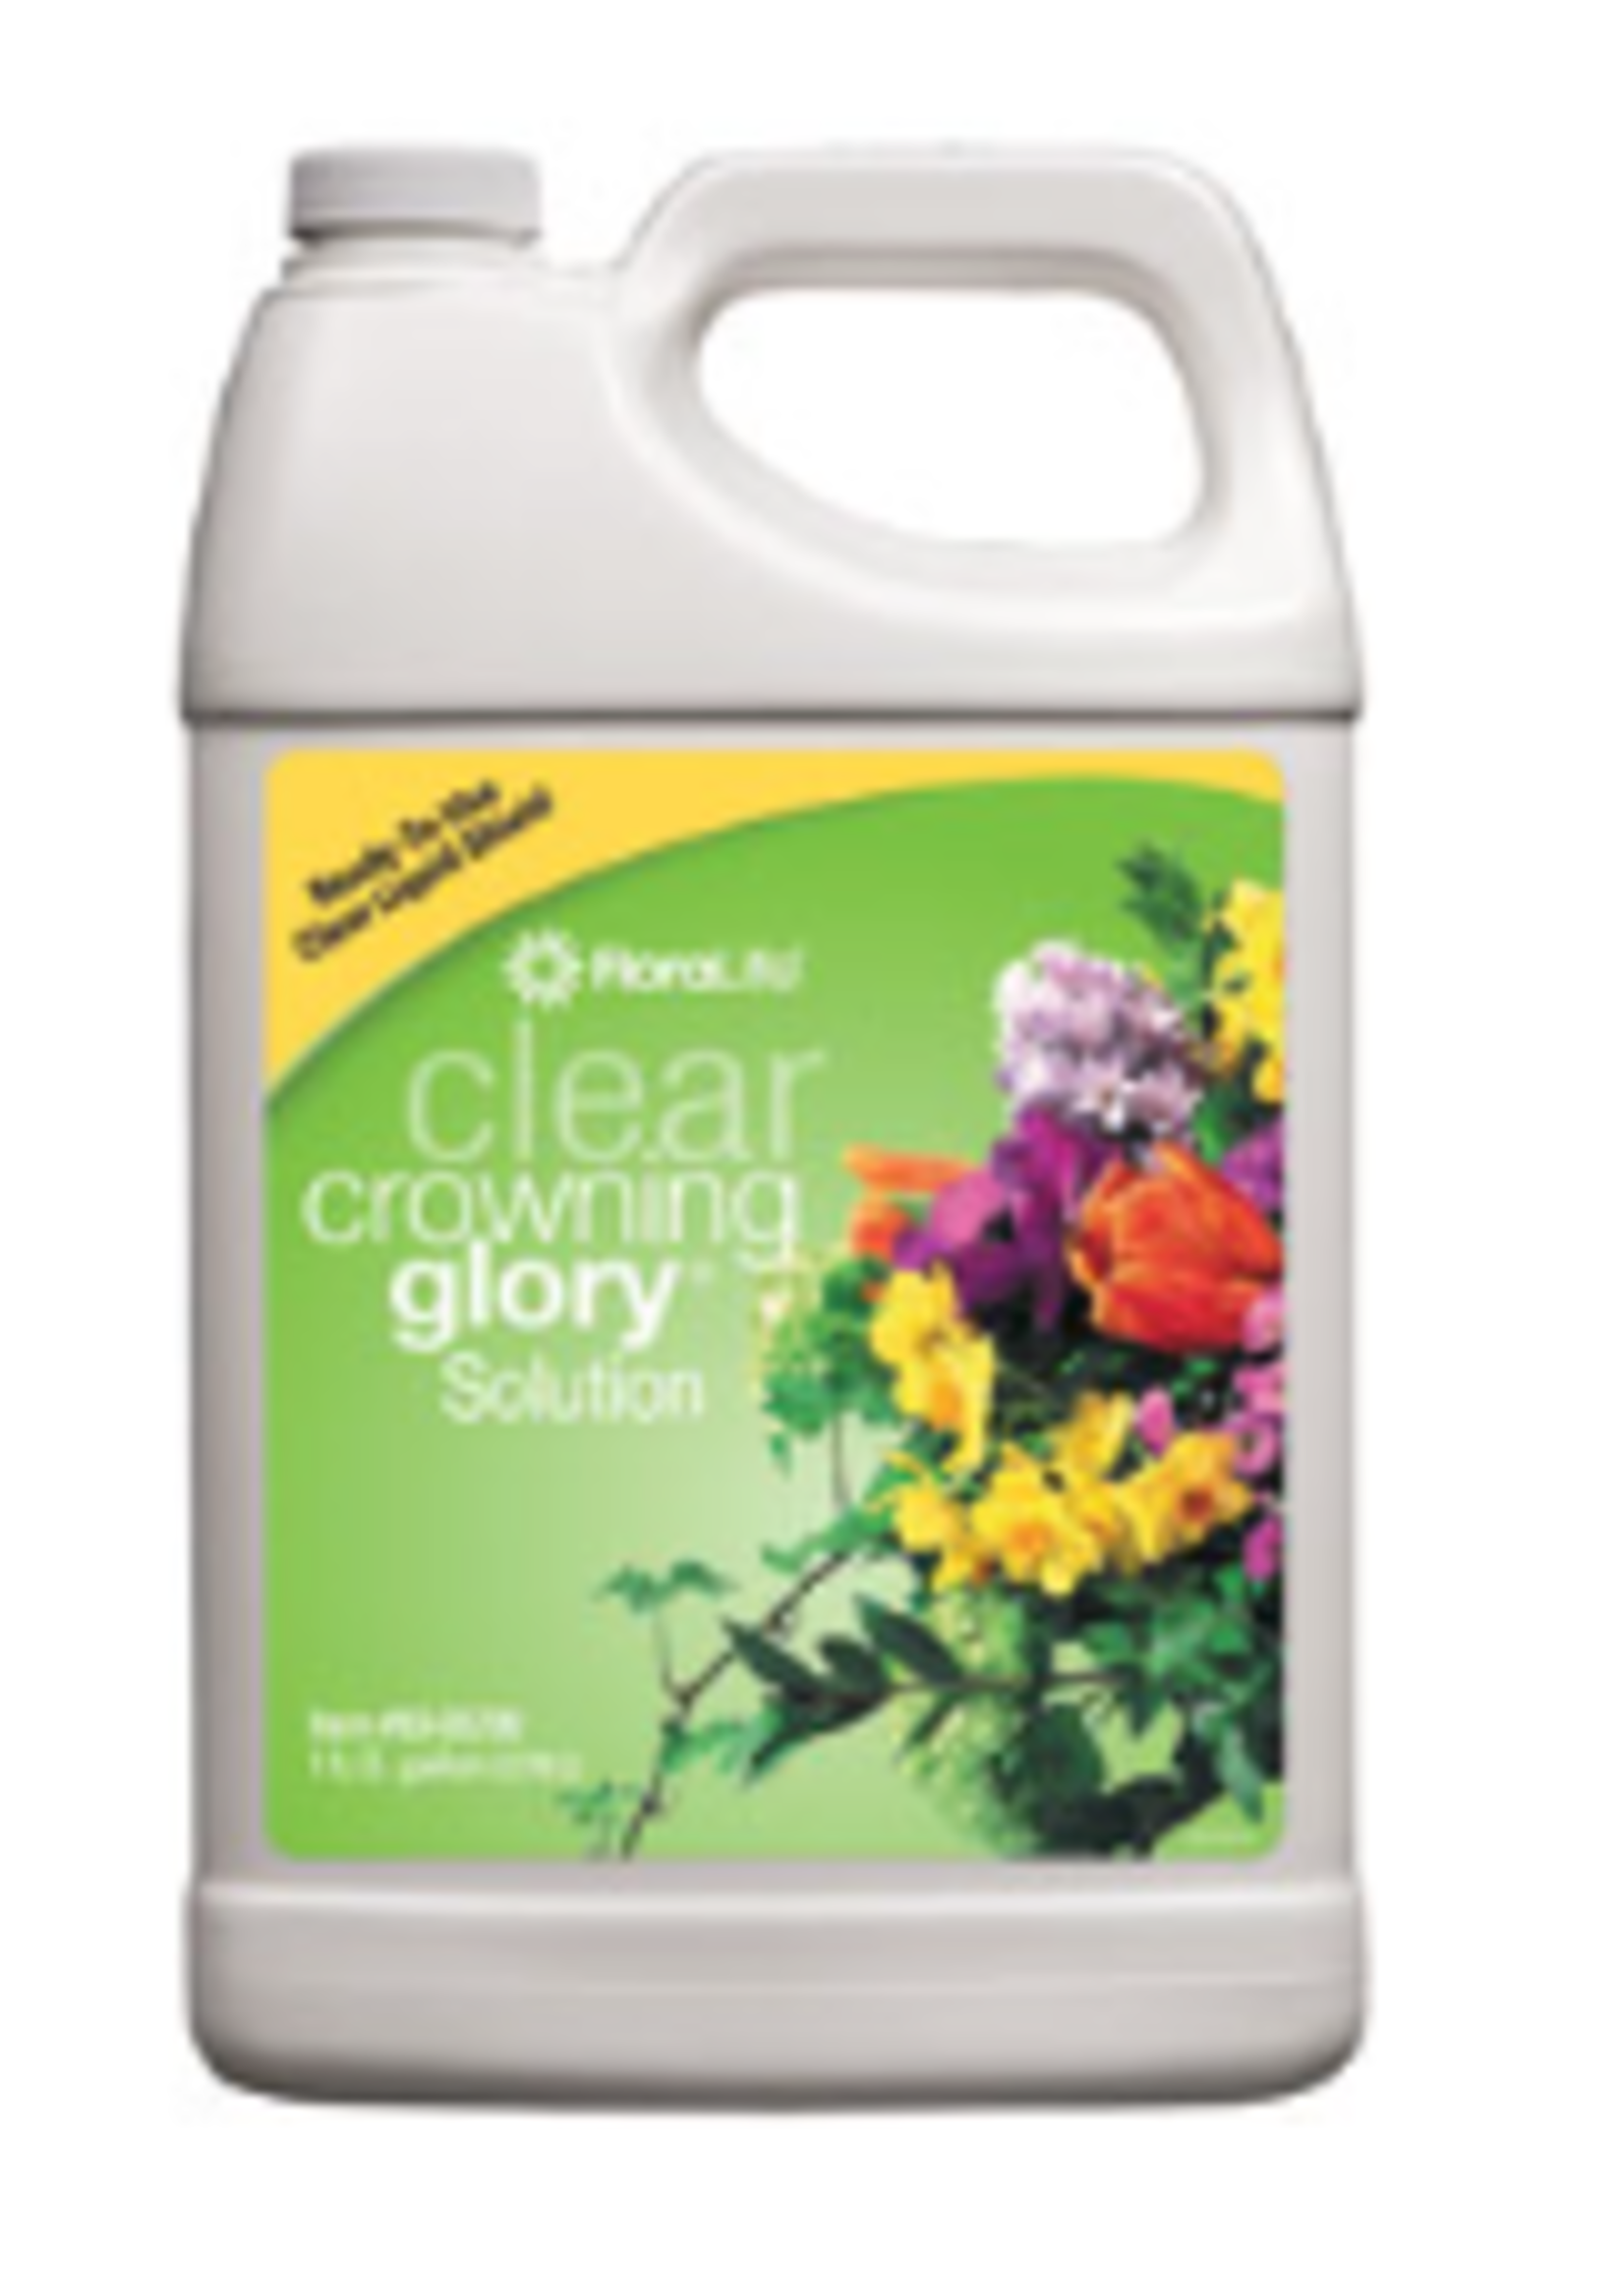 Floralife Floralife® Crowning Glory Clear, 1 gallon